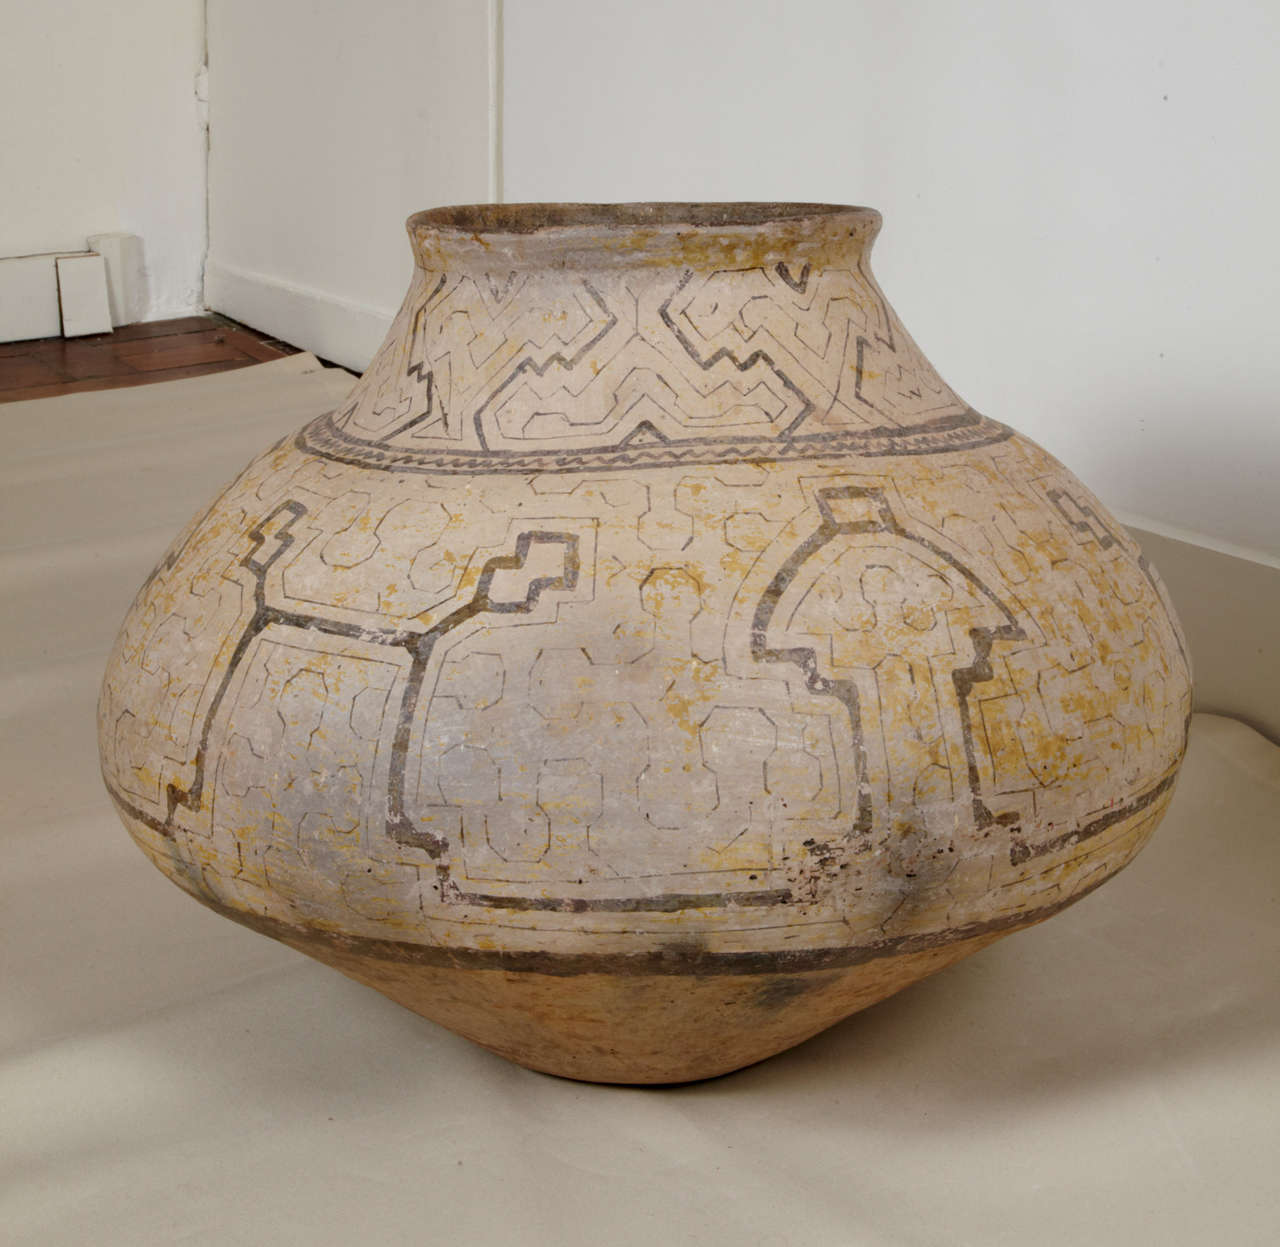 Very large antique Shipibo figural vessel, circa 1900-1930, Culture Peruvian Amazon. Natural pigments and bold, unique, geometric design. This vessel was produced to contain beverages. The bowl would be settled in the earth up to its widest point to